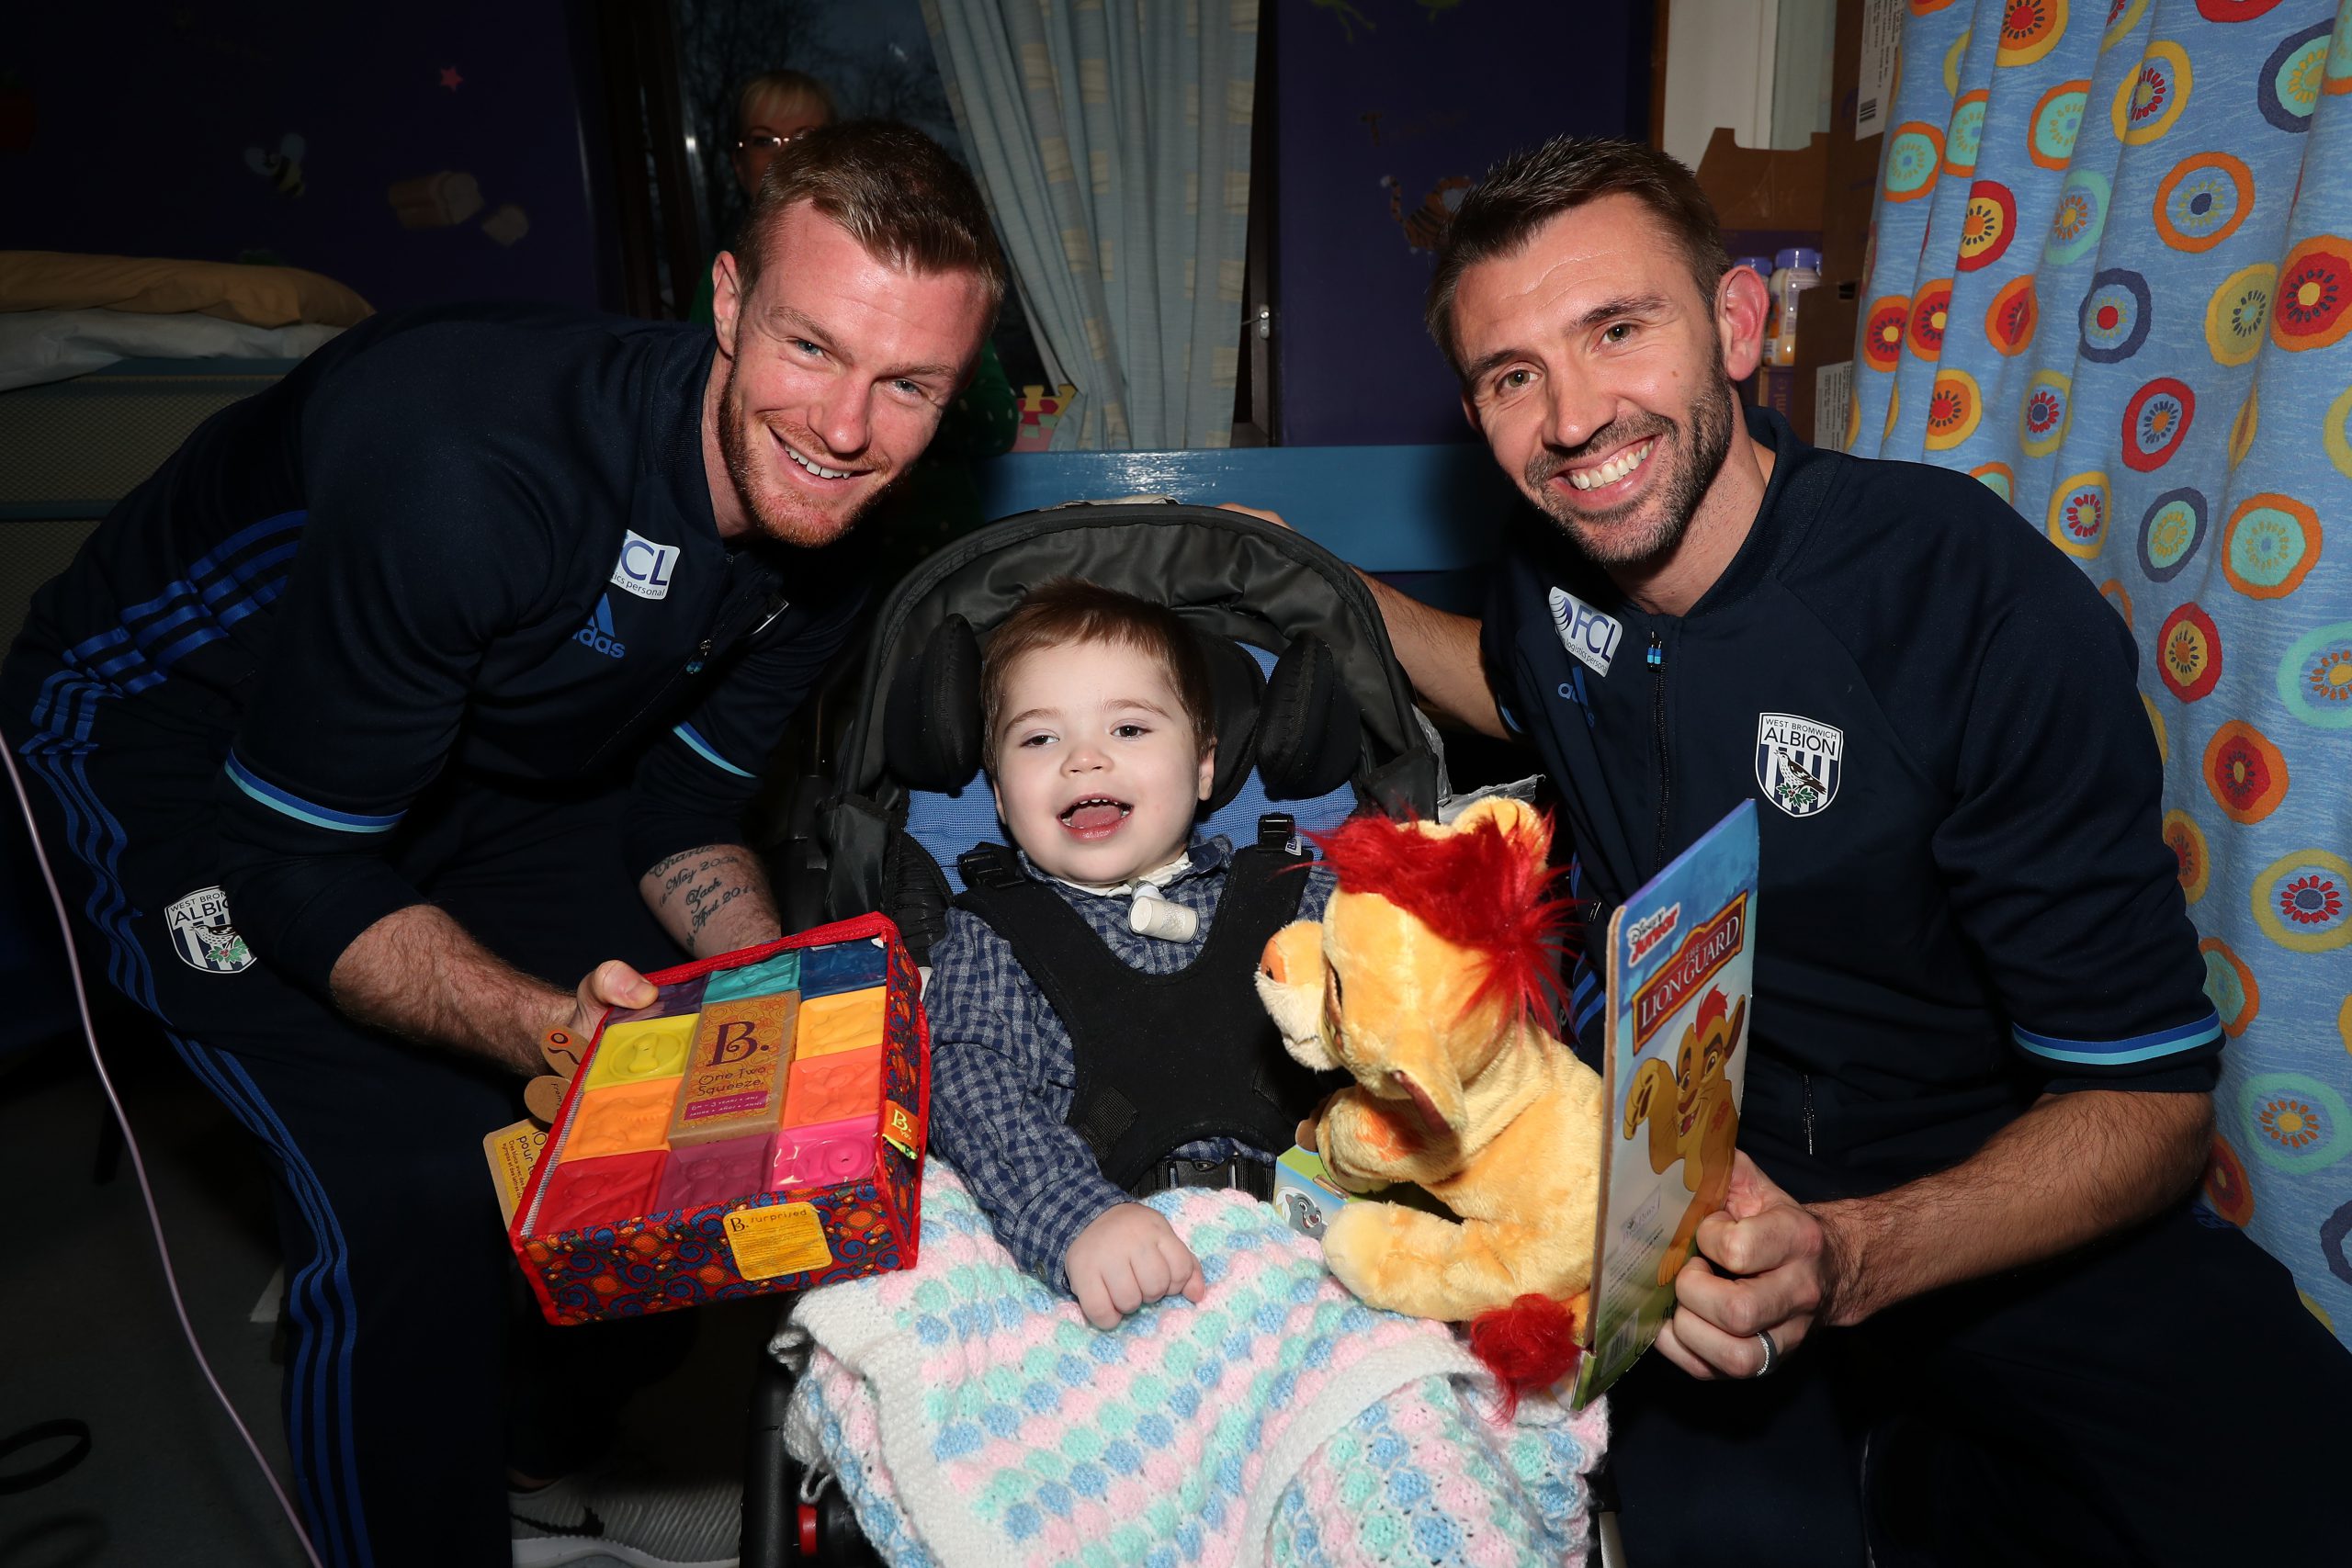 Chris Brunt of West Bromwich Albion and Gareth McAuley of West Bromwich Albion with Loki Hudson aged 3 at Sandwell Hospital where West Bromwich Albion players handed out Christmas presents  to sick children